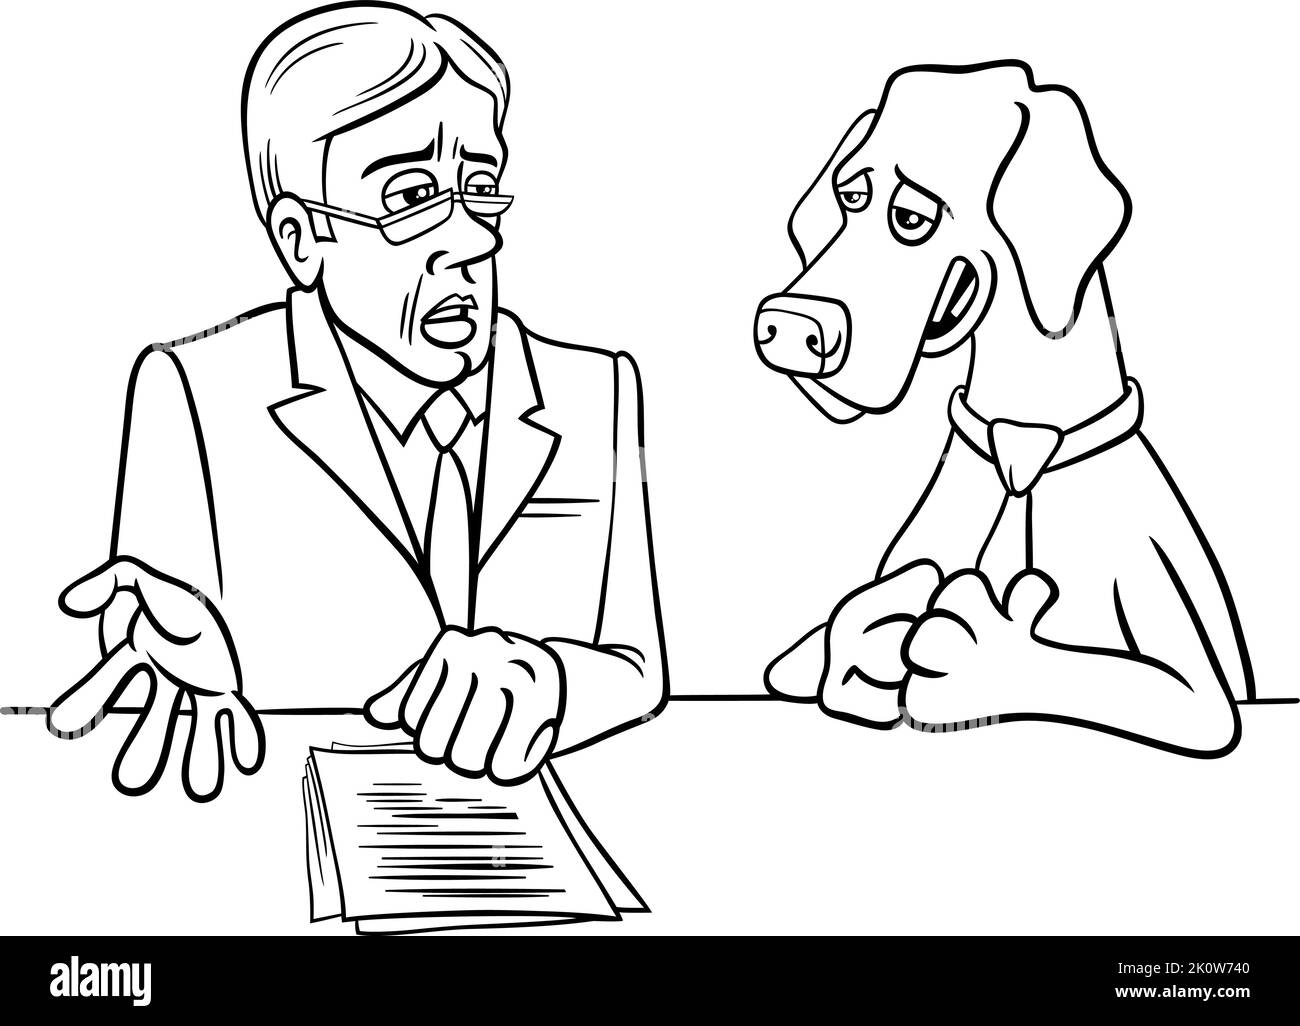 Black and white cartoon illustration of the dog giving an interview coloring page Stock Vector